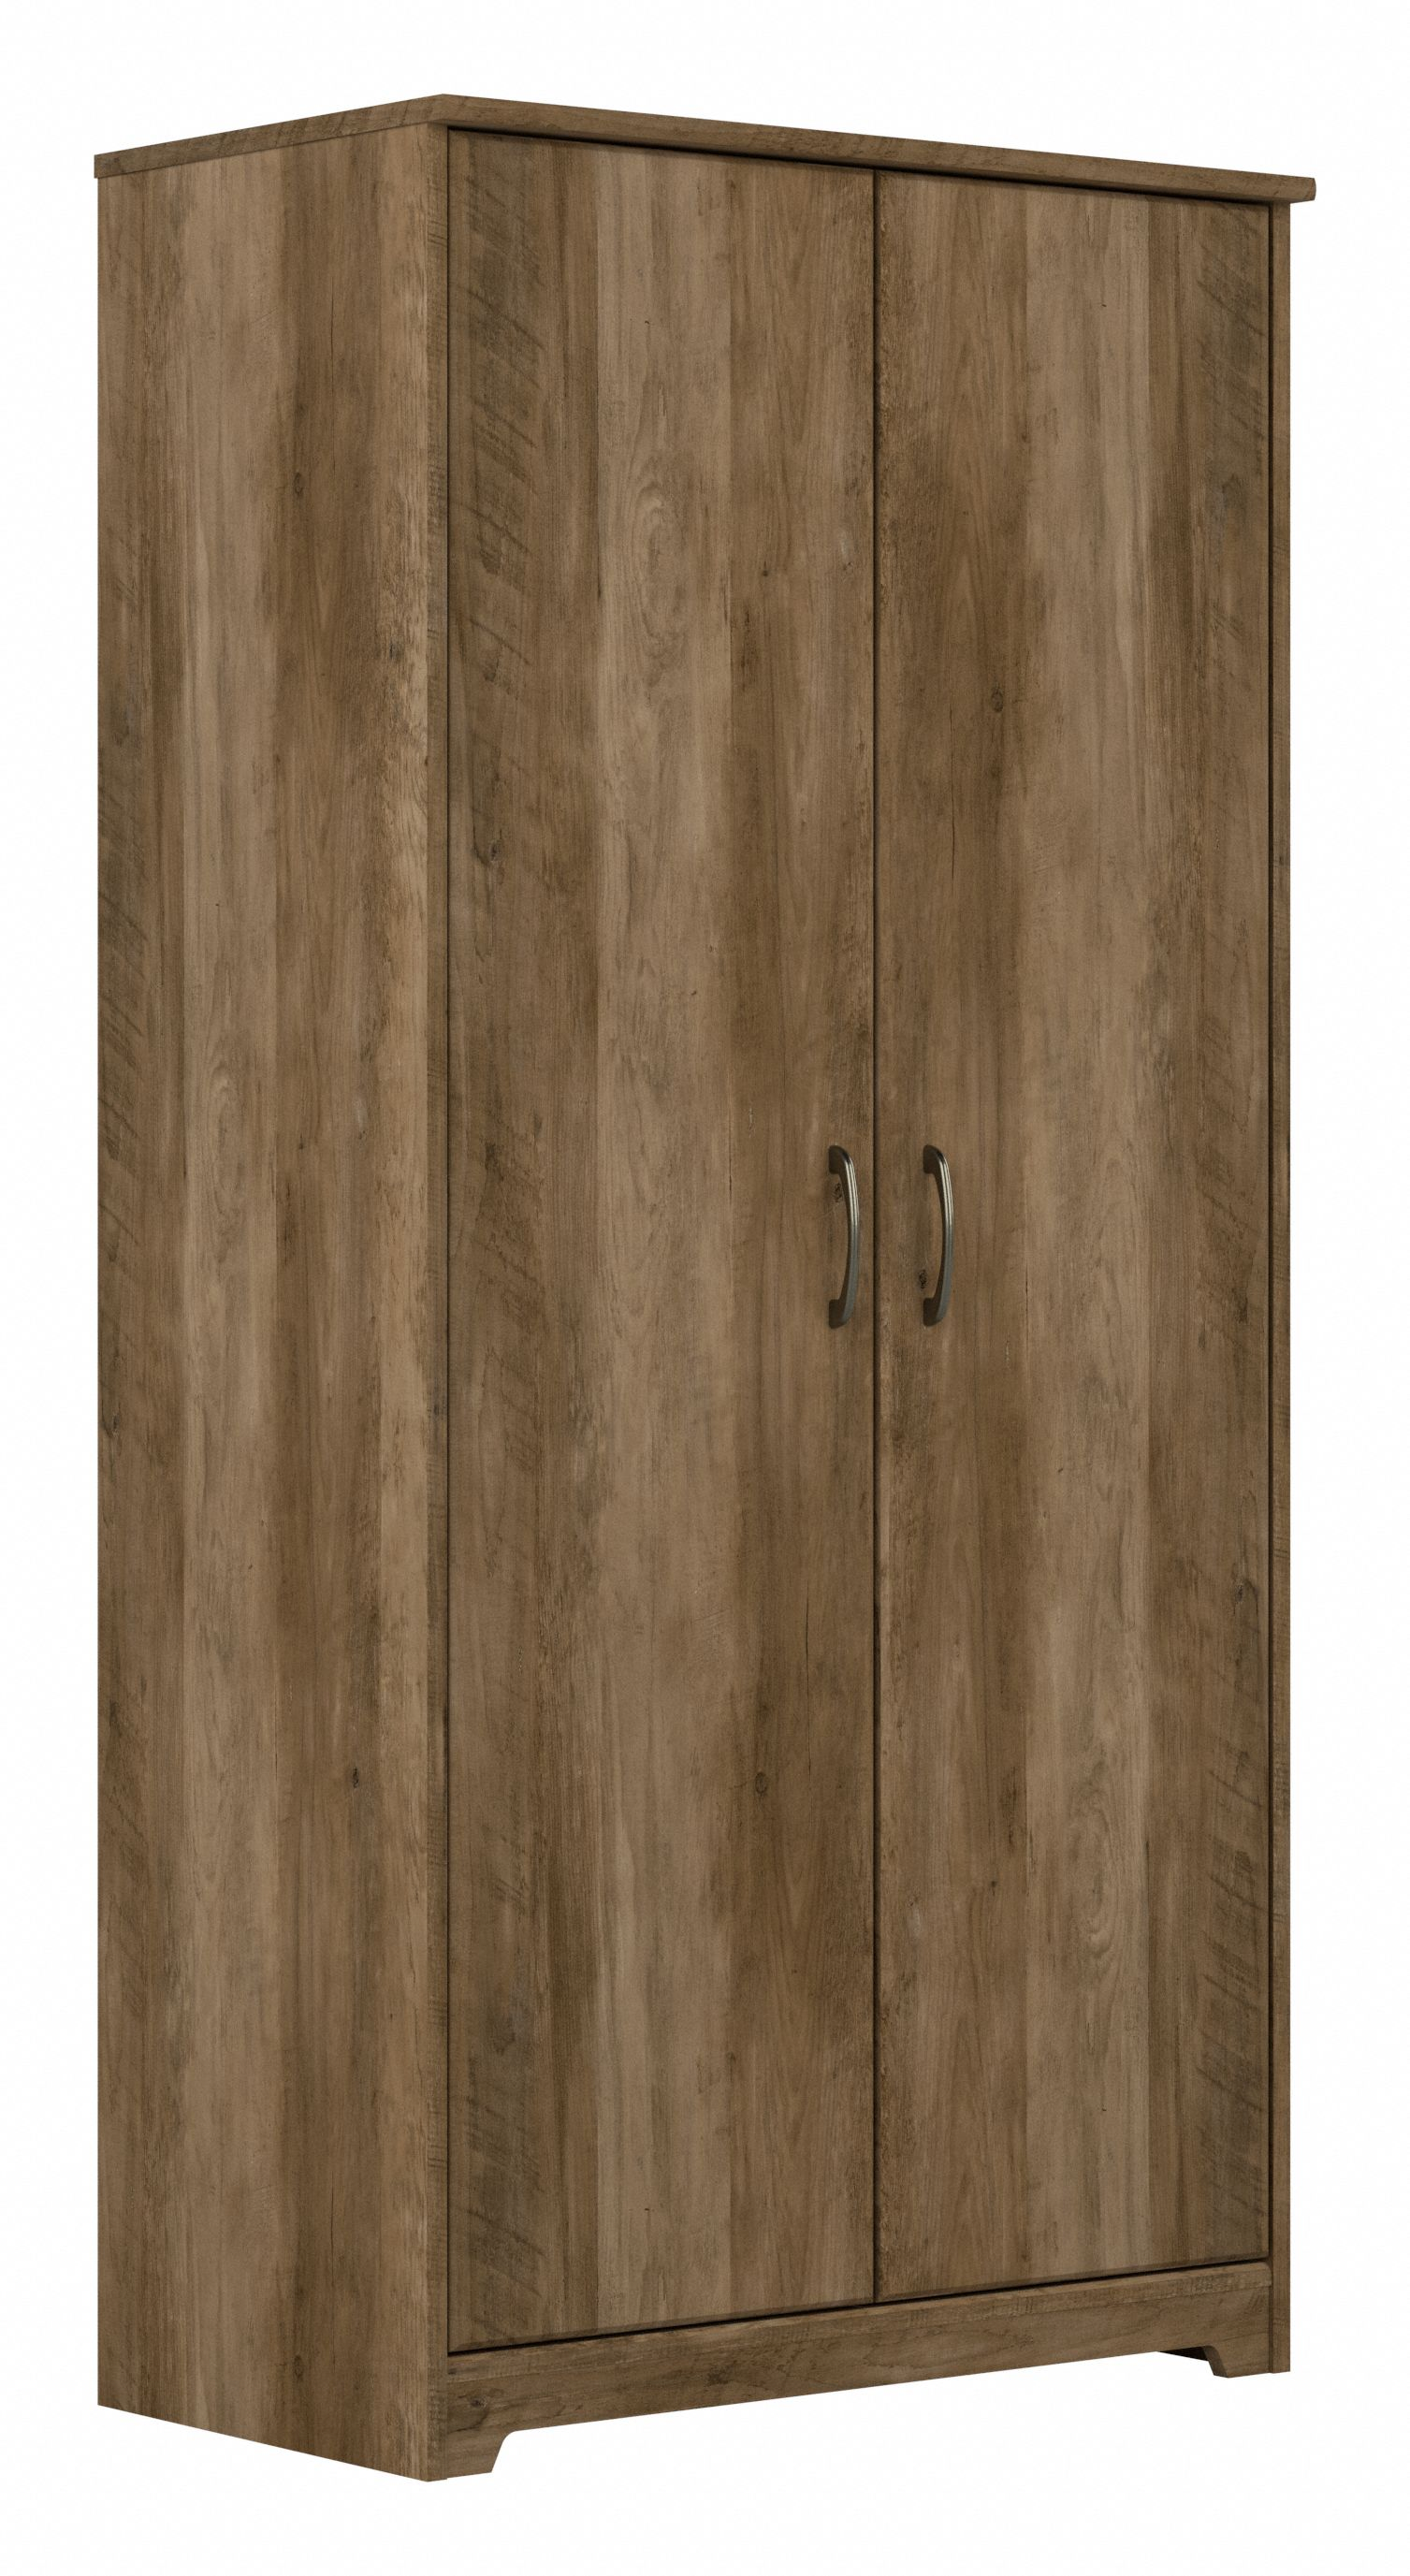 Shop Bush Furniture Cabot Tall Kitchen Pantry Cabinet with Doors 02 WC31599-Z #color_reclaimed pine